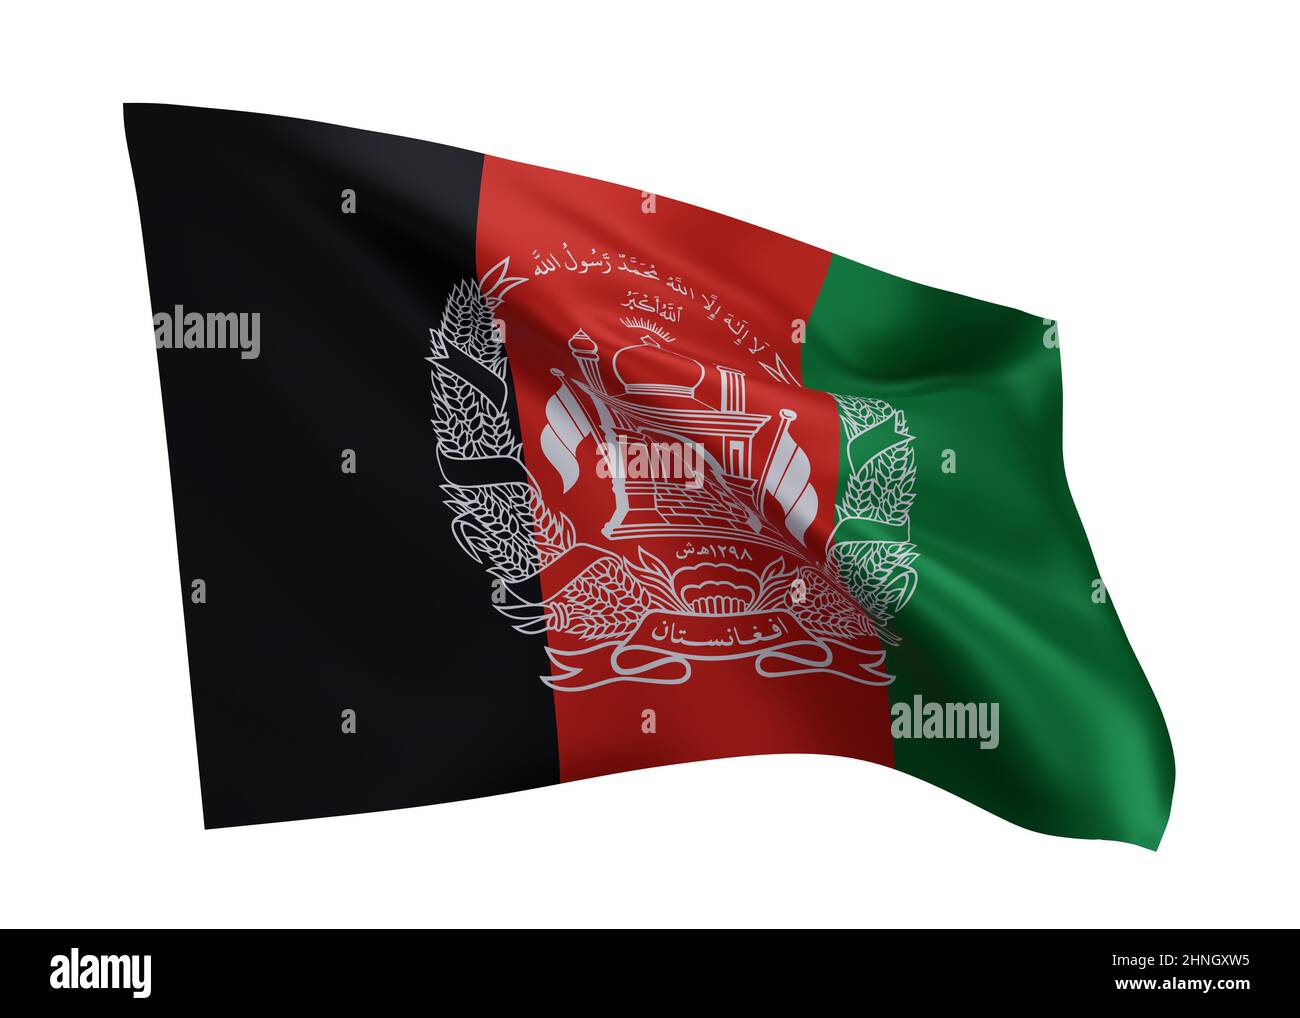 3d illustration flag of Afghanistan. Afghani high resolution flag isolated against white background. 3d rendering Stock Photo